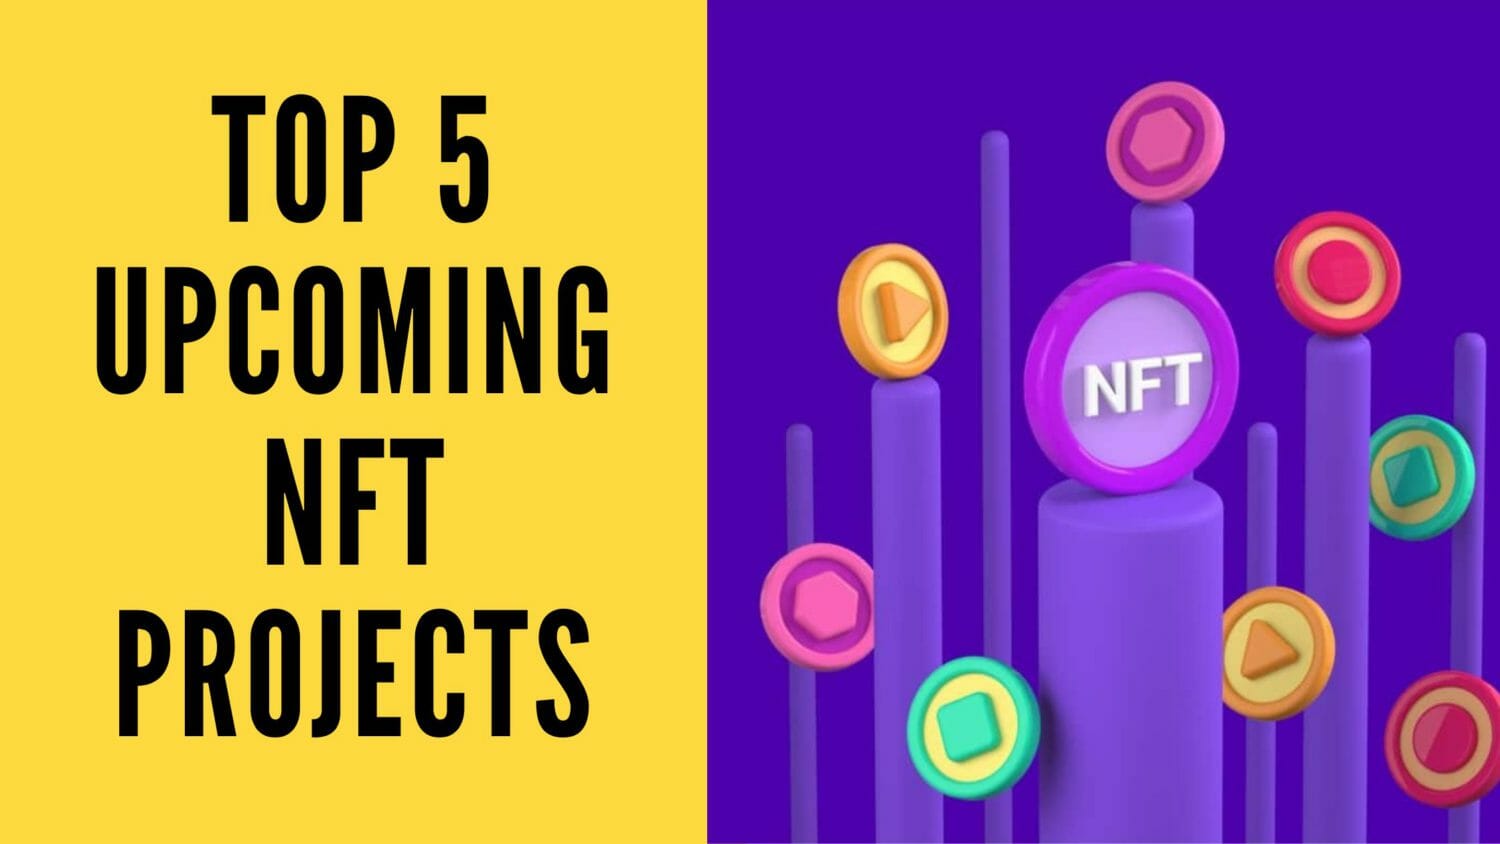 Top 5 Upcoming Nft Projects